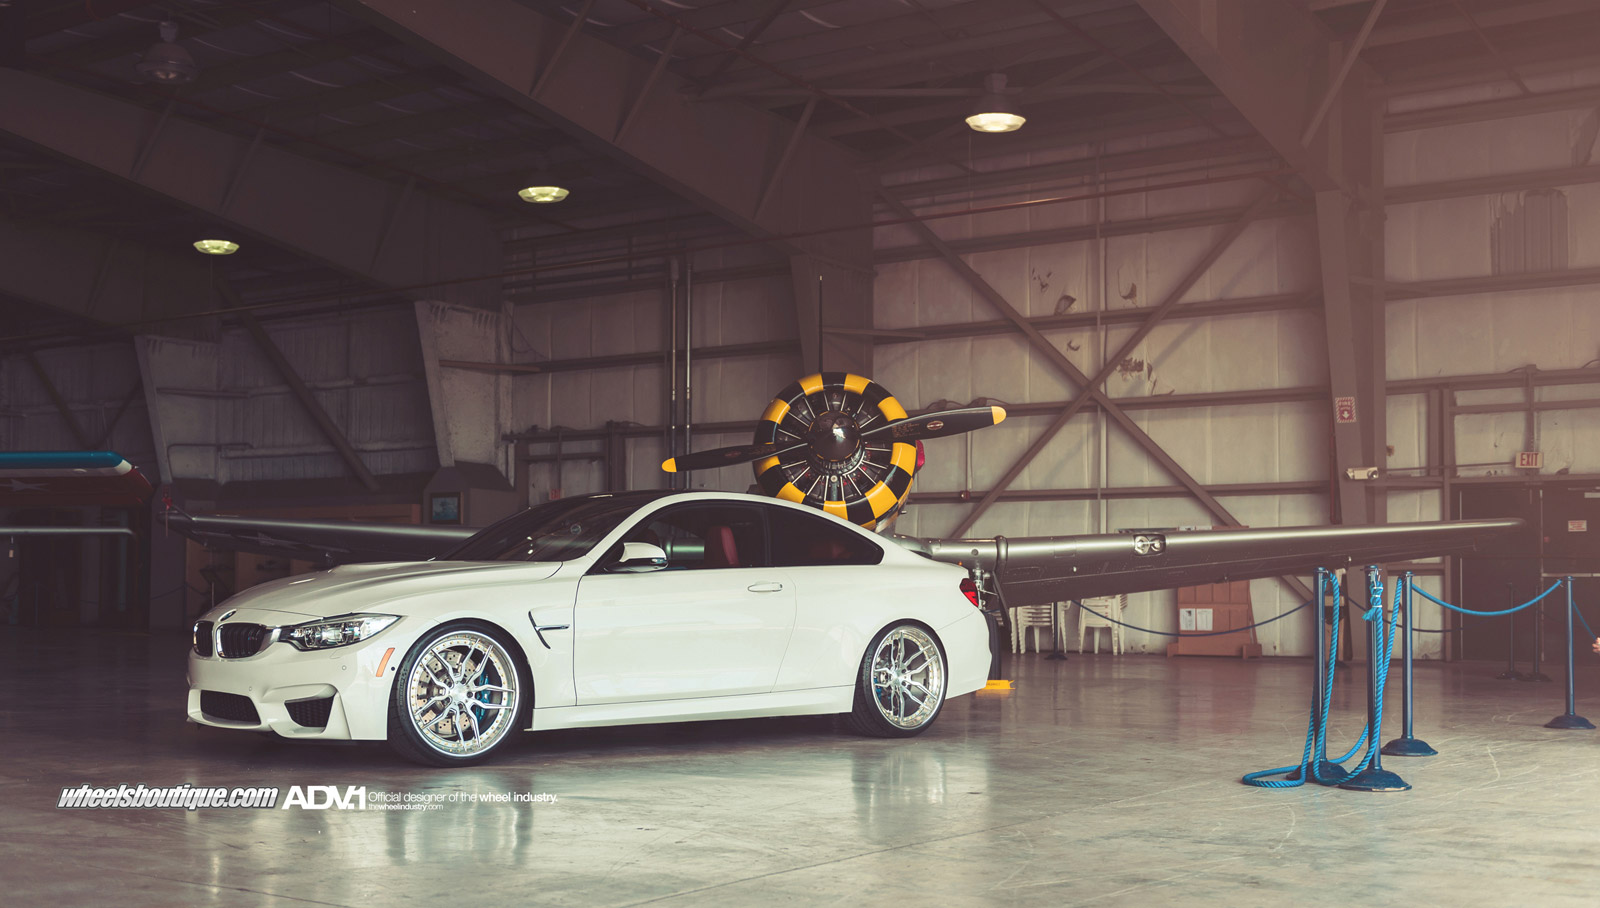 The Perfect Match BMW M4 and ADV.1 Wheels autoevolution